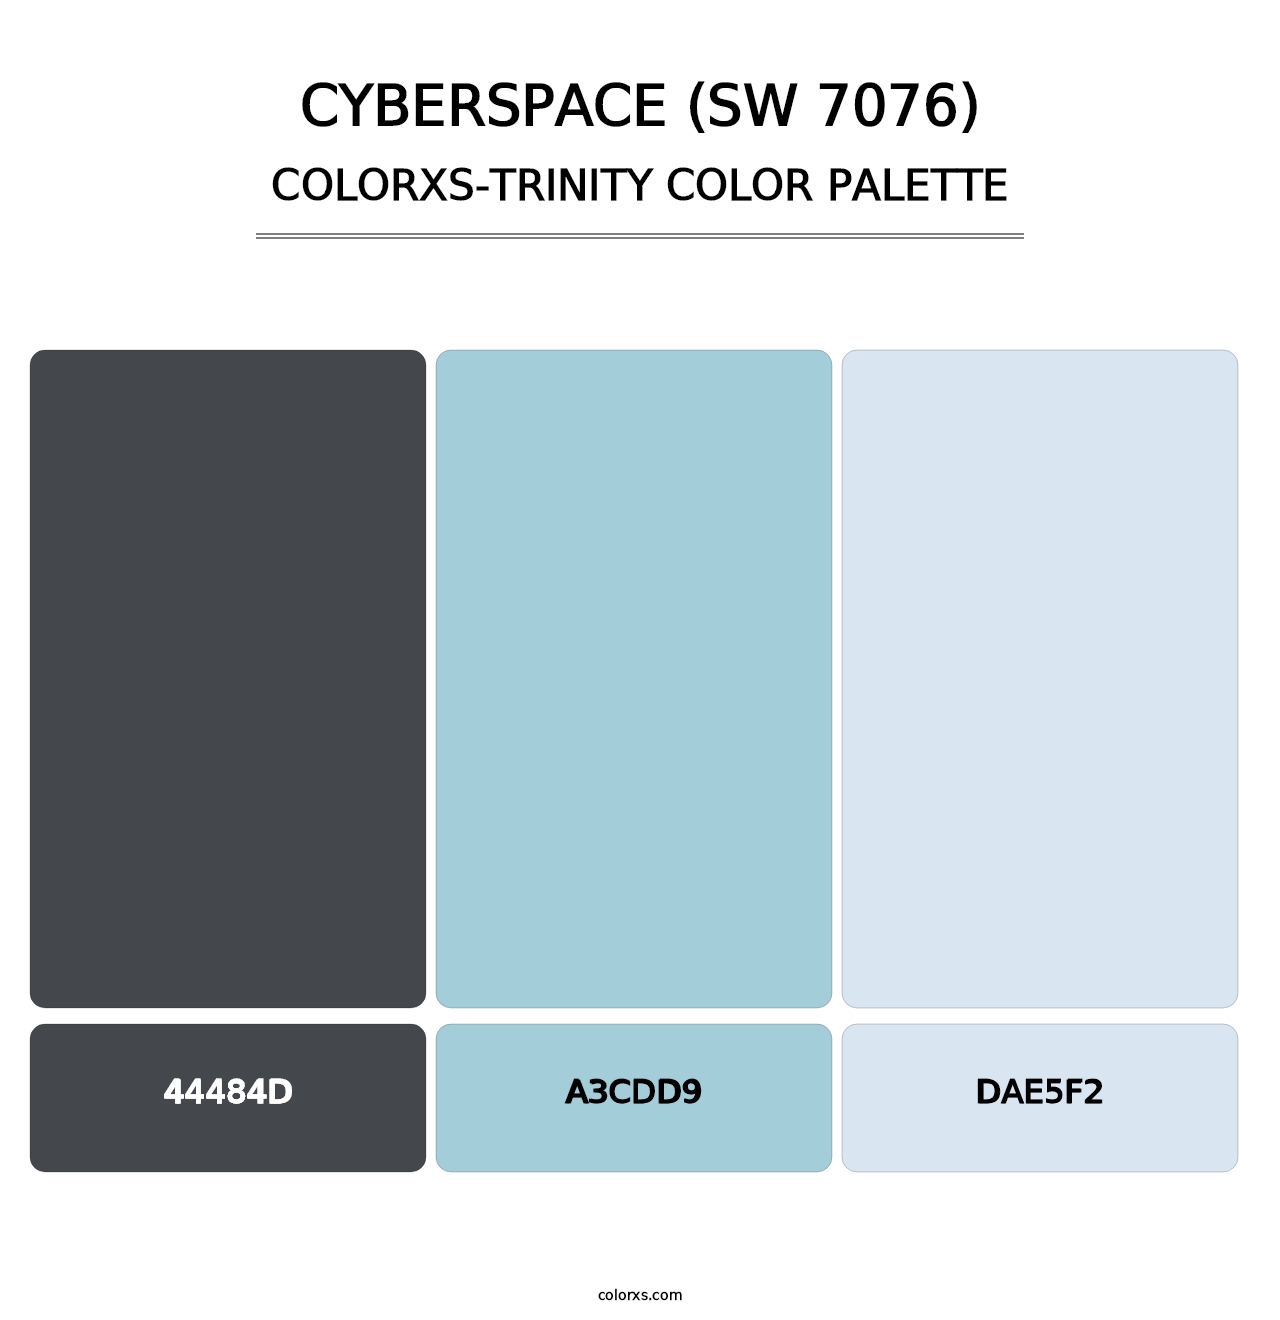 Cyberspace (SW 7076) - Colorxs Trinity Palette